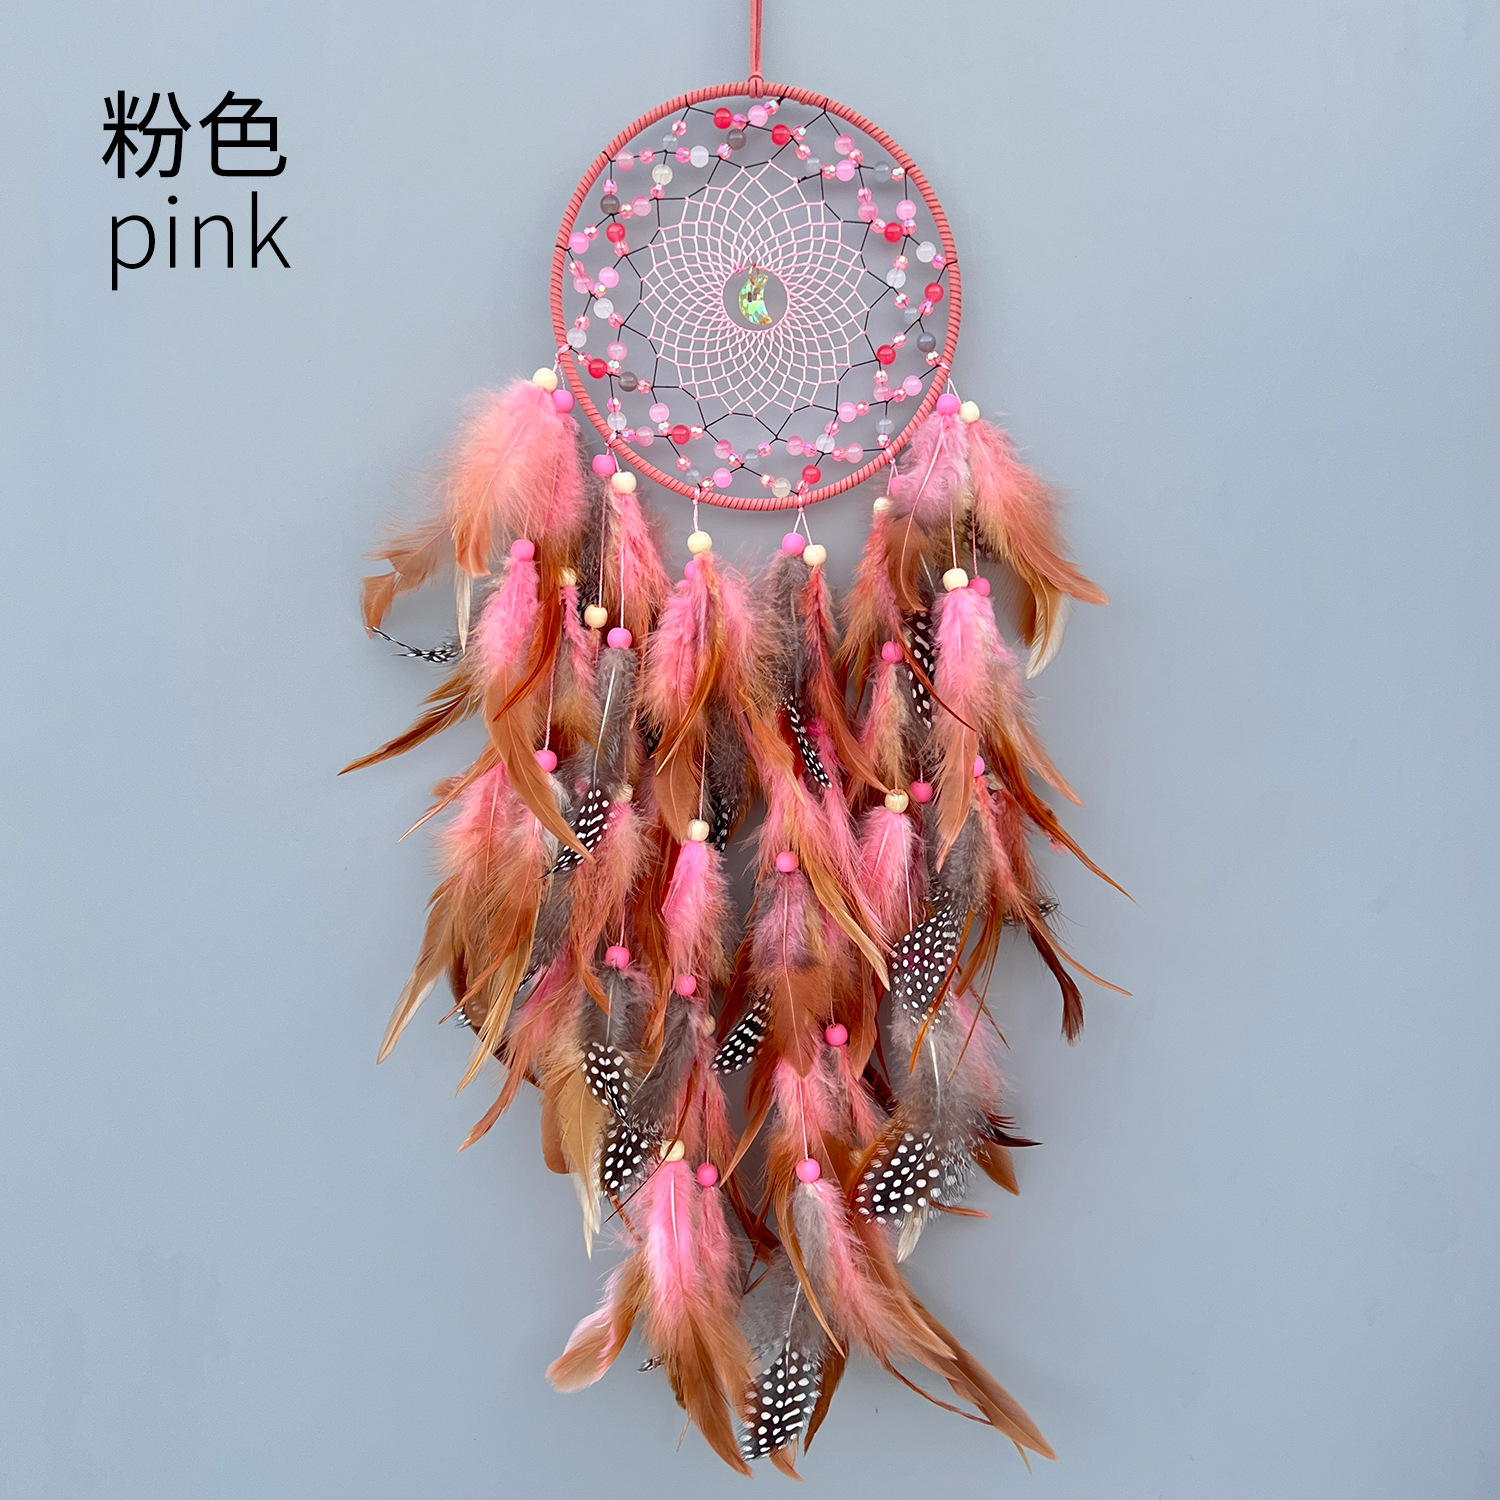 [Mengyi Original] Agate Dreamcatcher Ornaments Colorful Feather Woven Decorations Wall Pendant Exclusive for Cross-Border